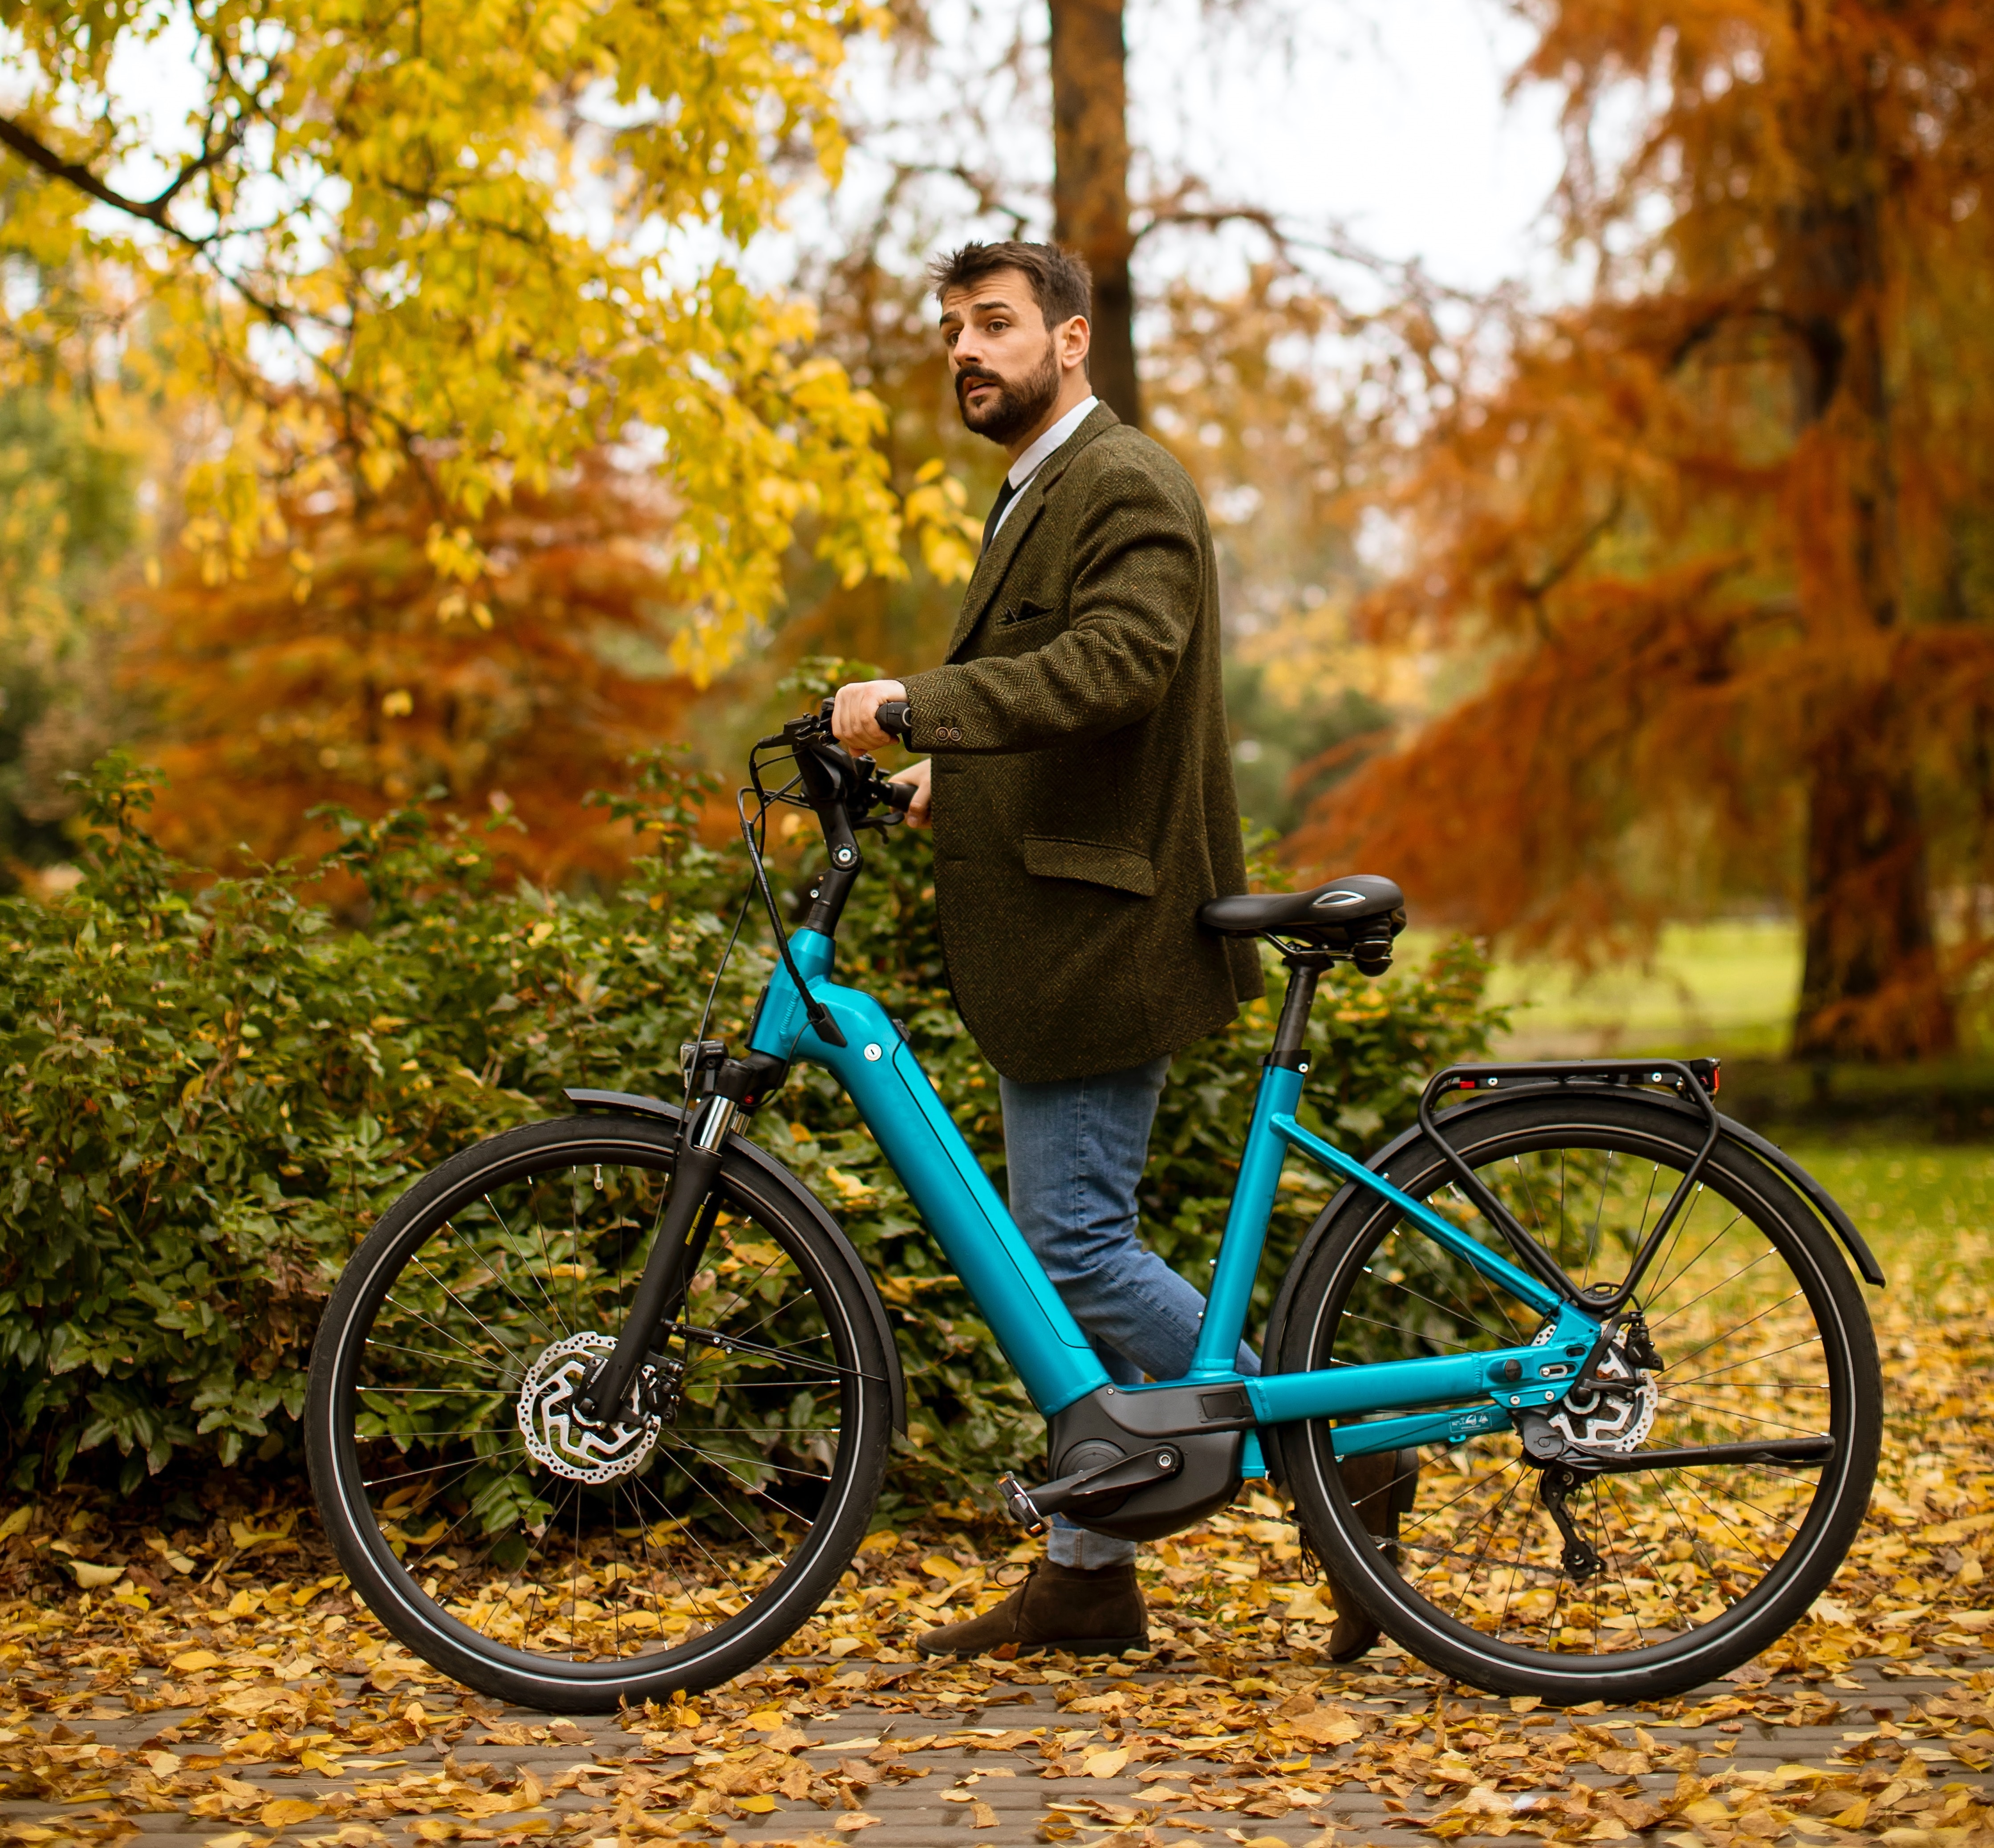 How much does an ebike cost